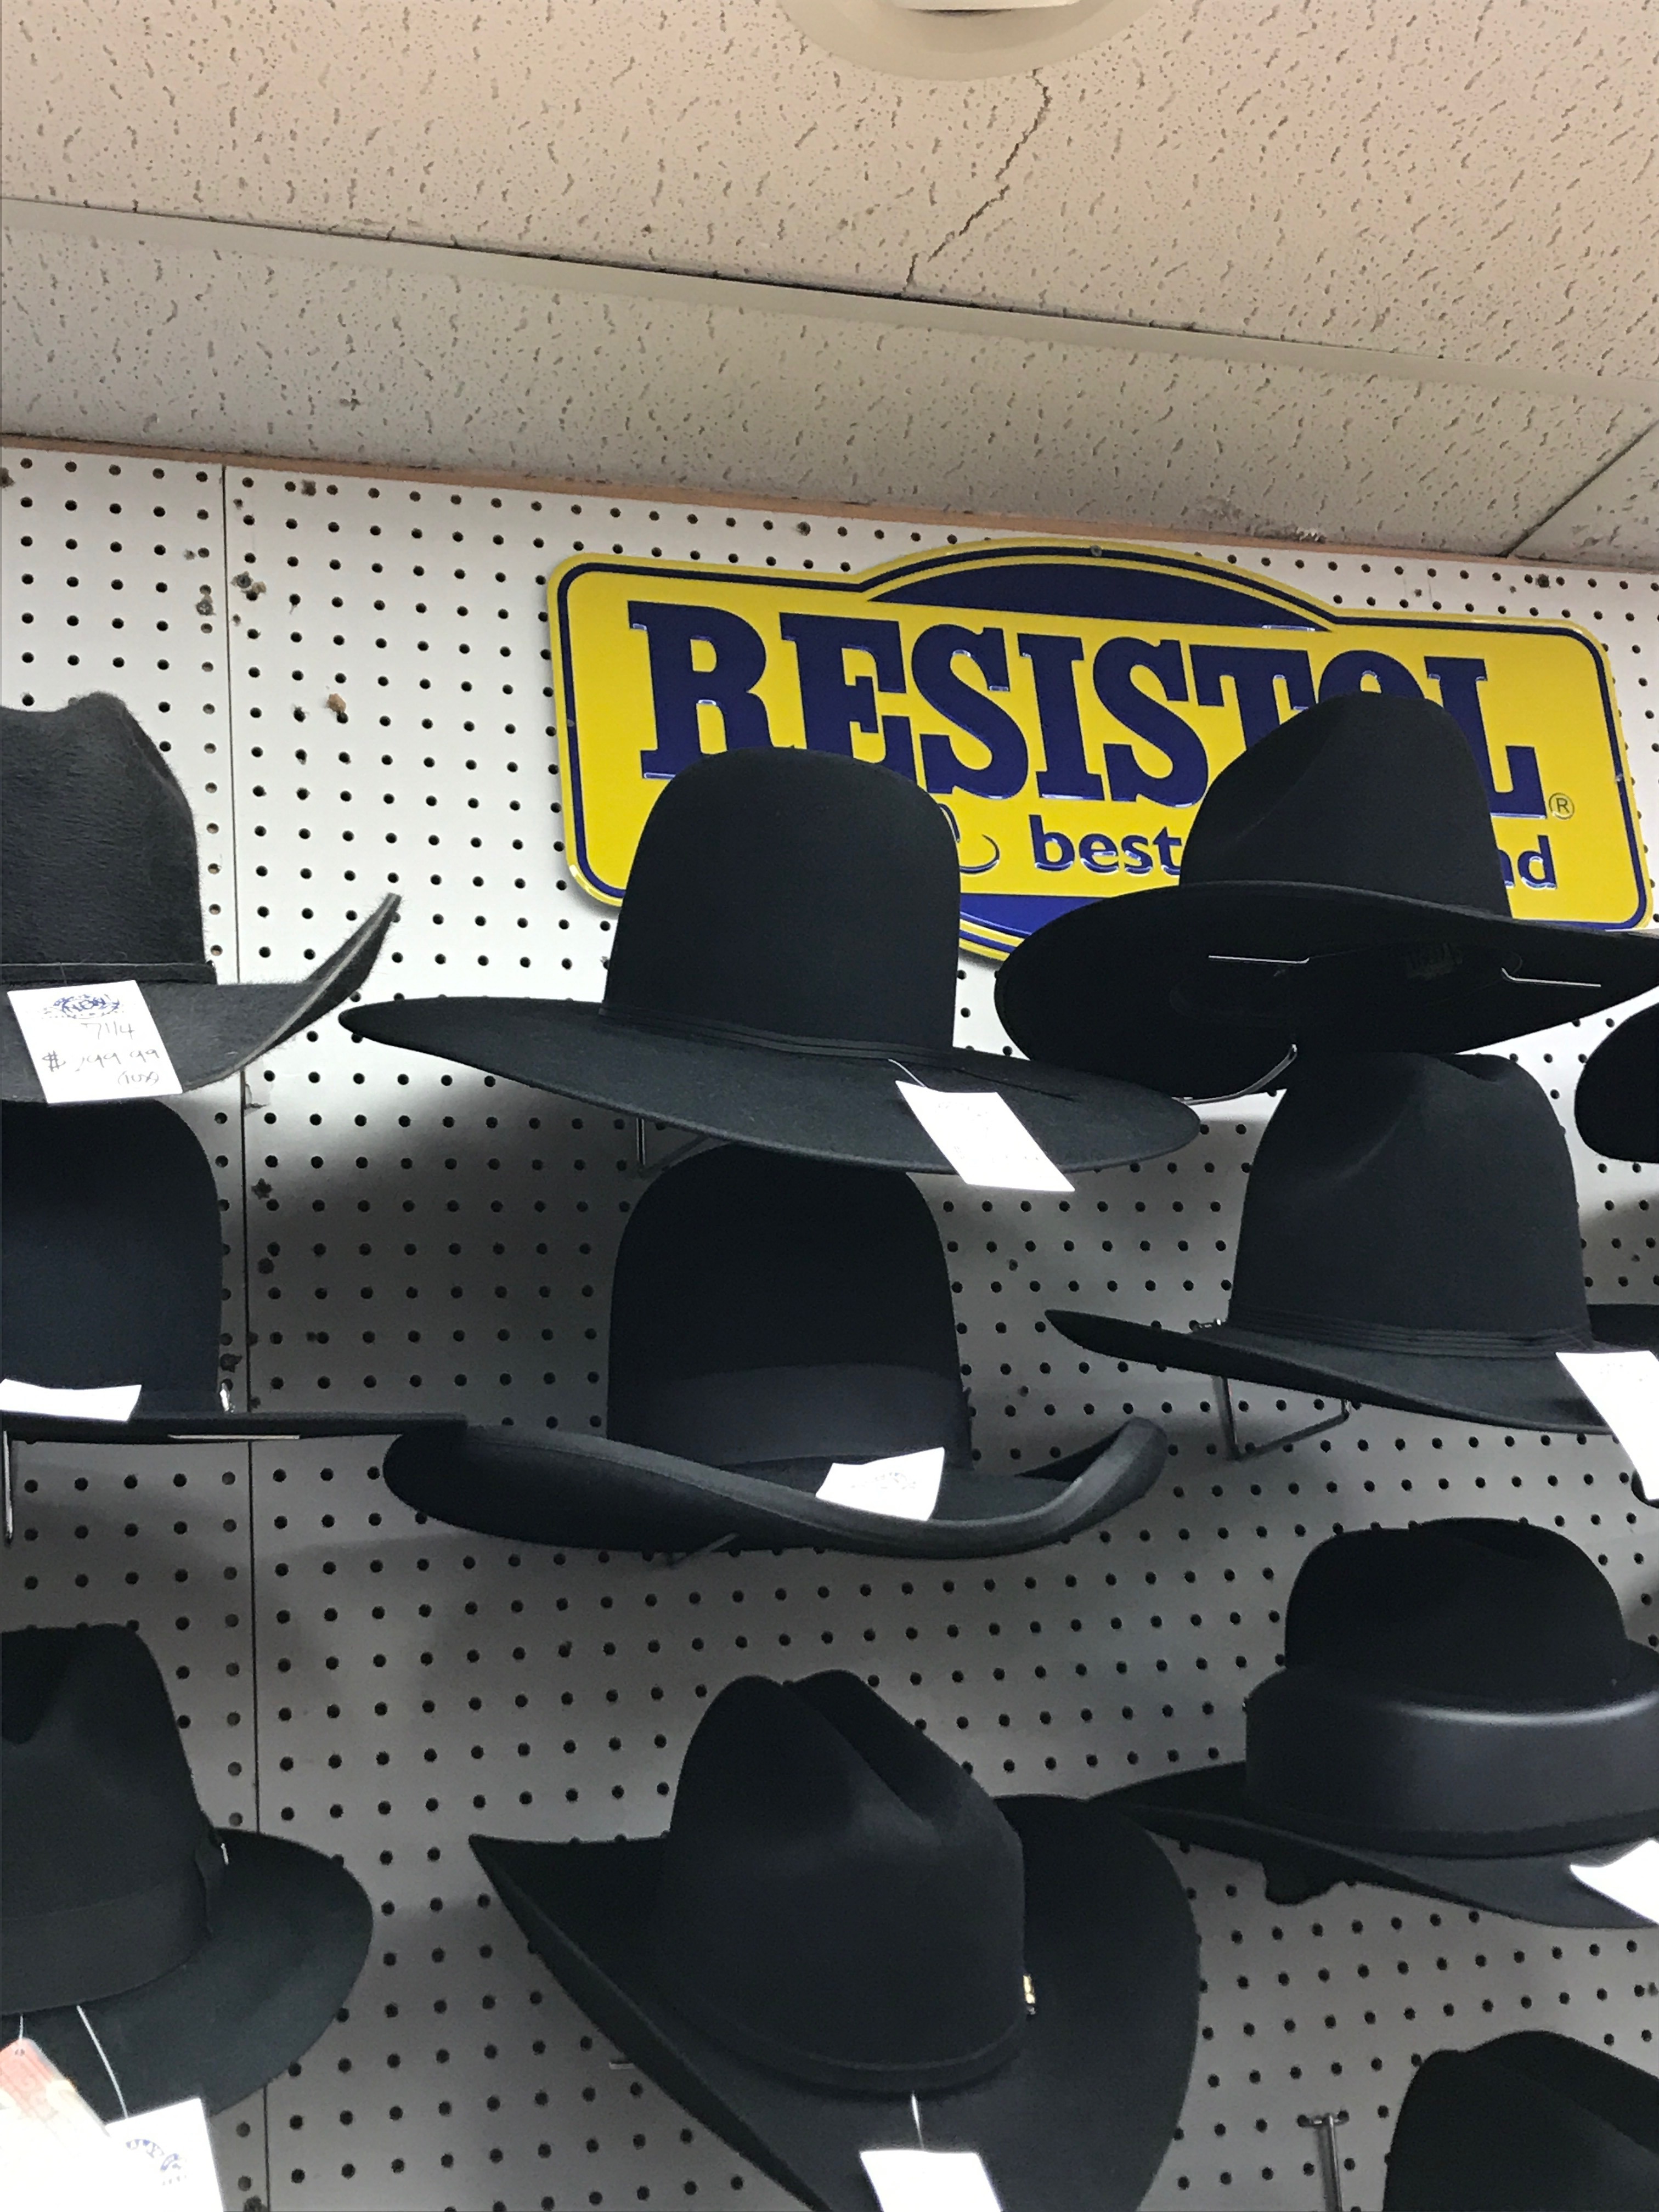 A full wall of short-brimmed hats on display at Alcala’s Western Wear